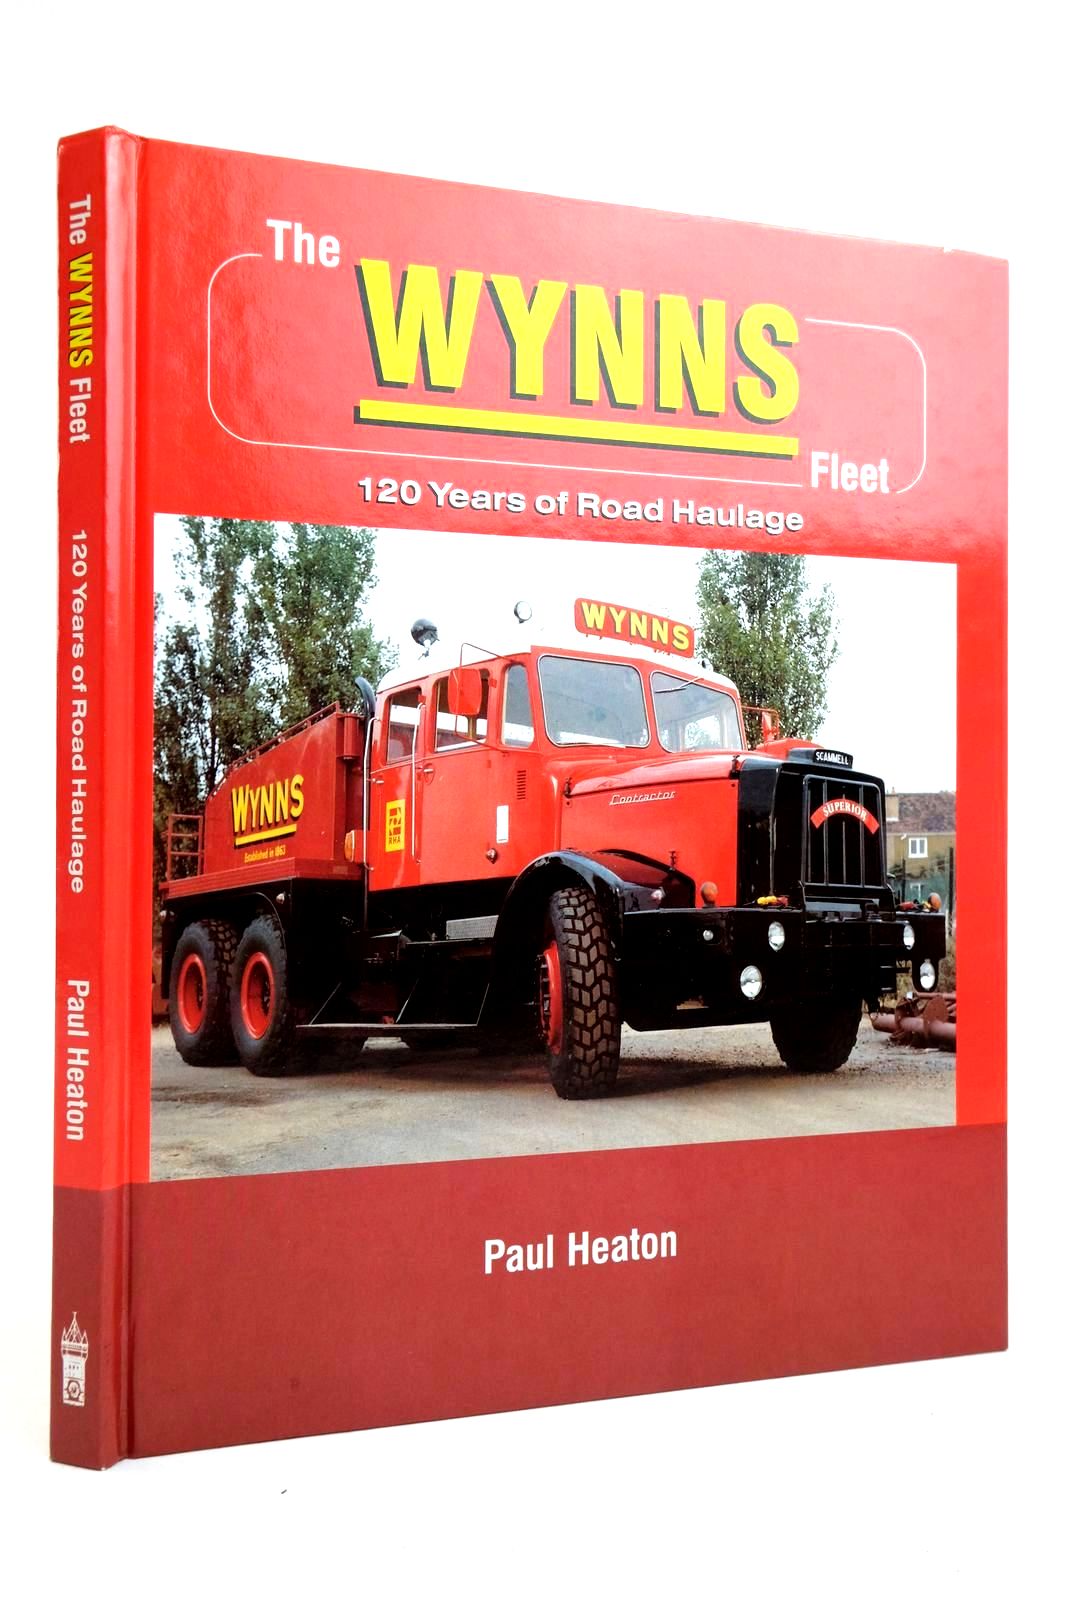 Photo of THE WYNNS FLEET - 120 YEARS OF ROAD HAULAGE written by Heaton, Paul published by P.M. Heaton Publishing (STOCK CODE: 2135693)  for sale by Stella & Rose's Books